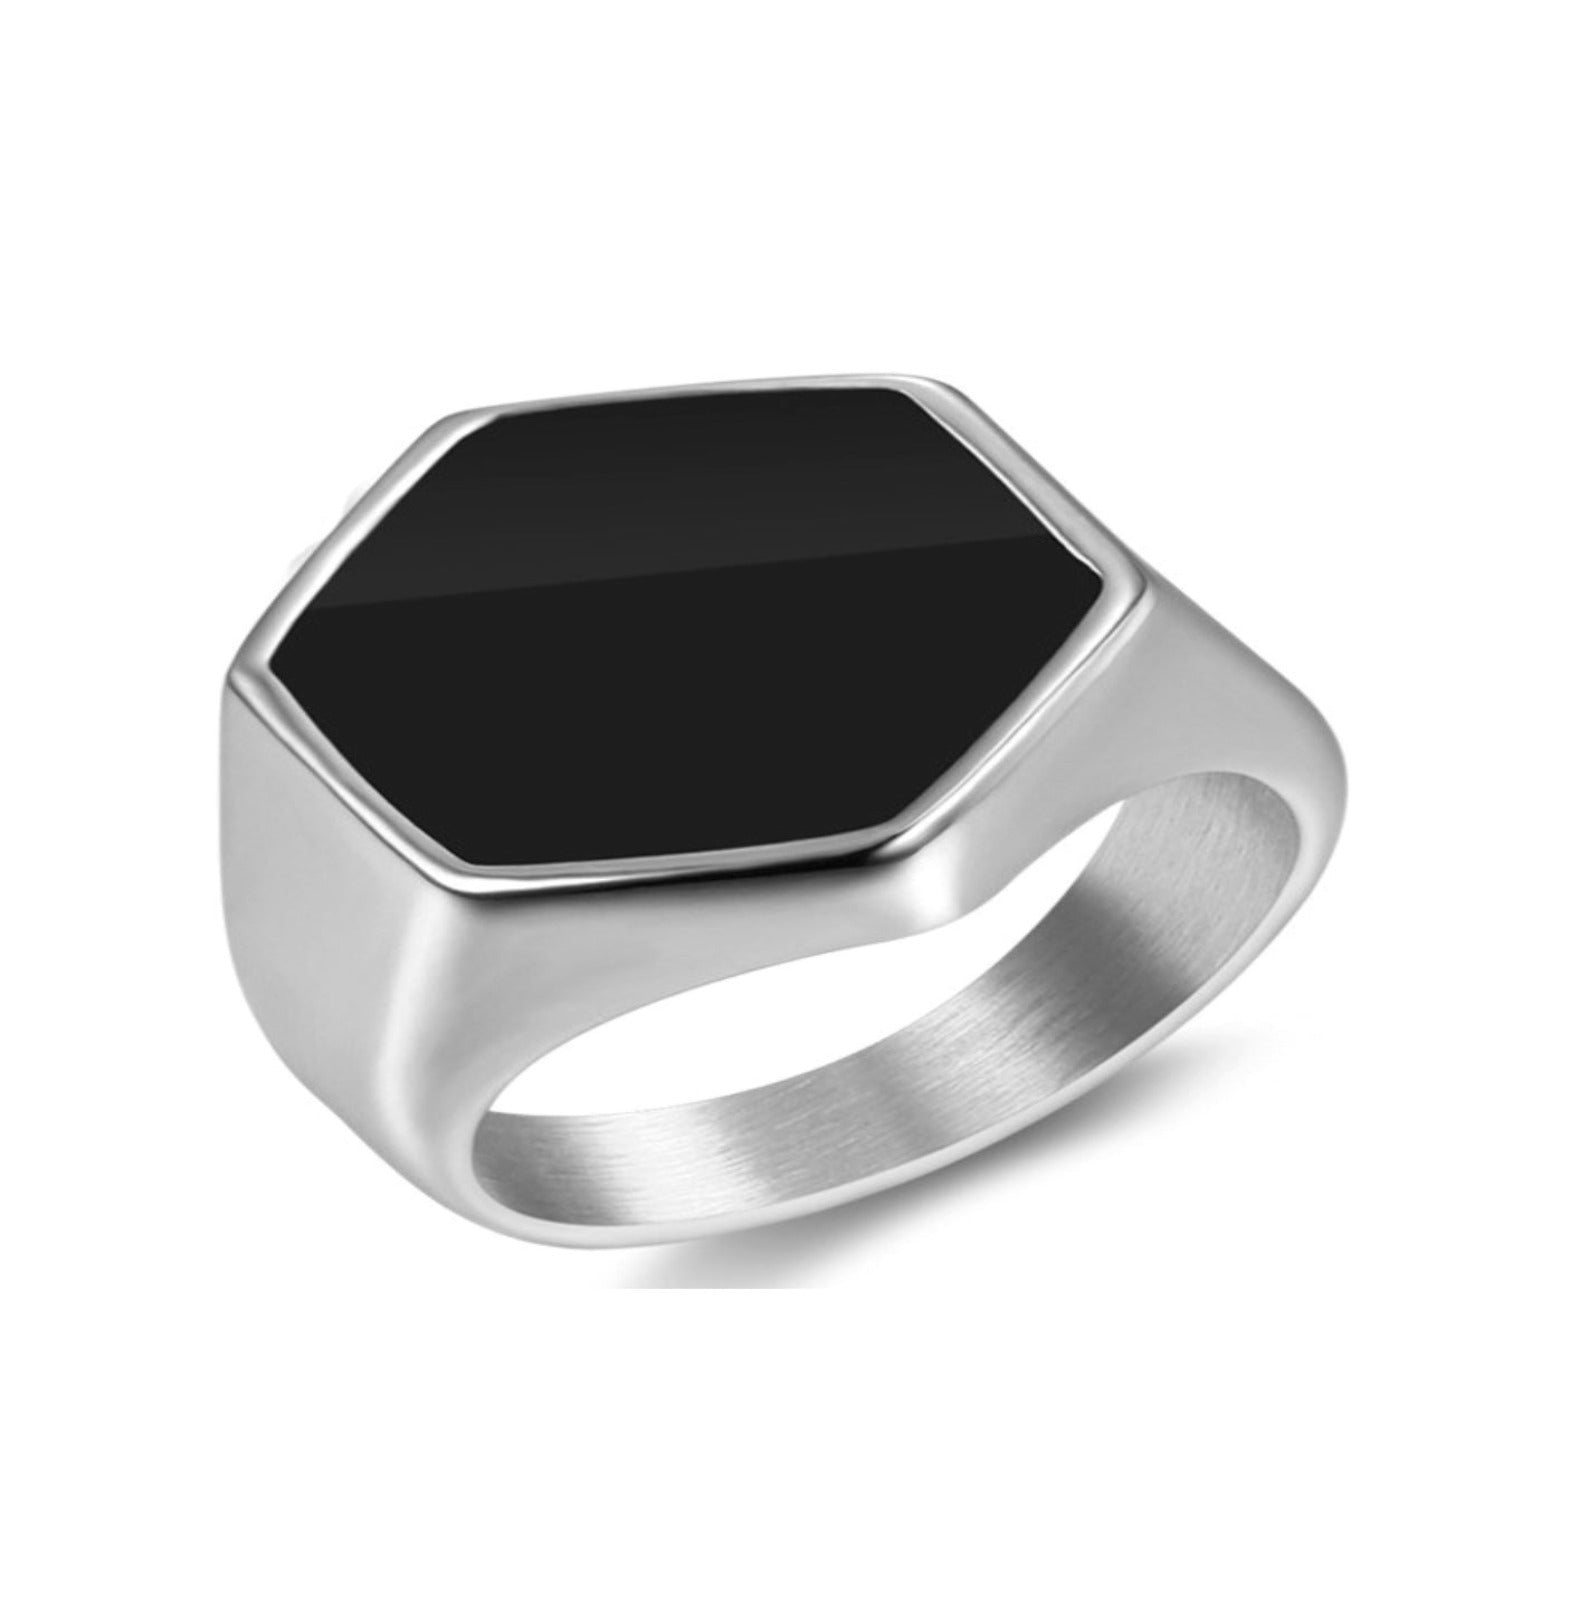 ONYX RING ring Yubama Jewelry Online Store - The Elegant Designs of Gold and Silver ! 